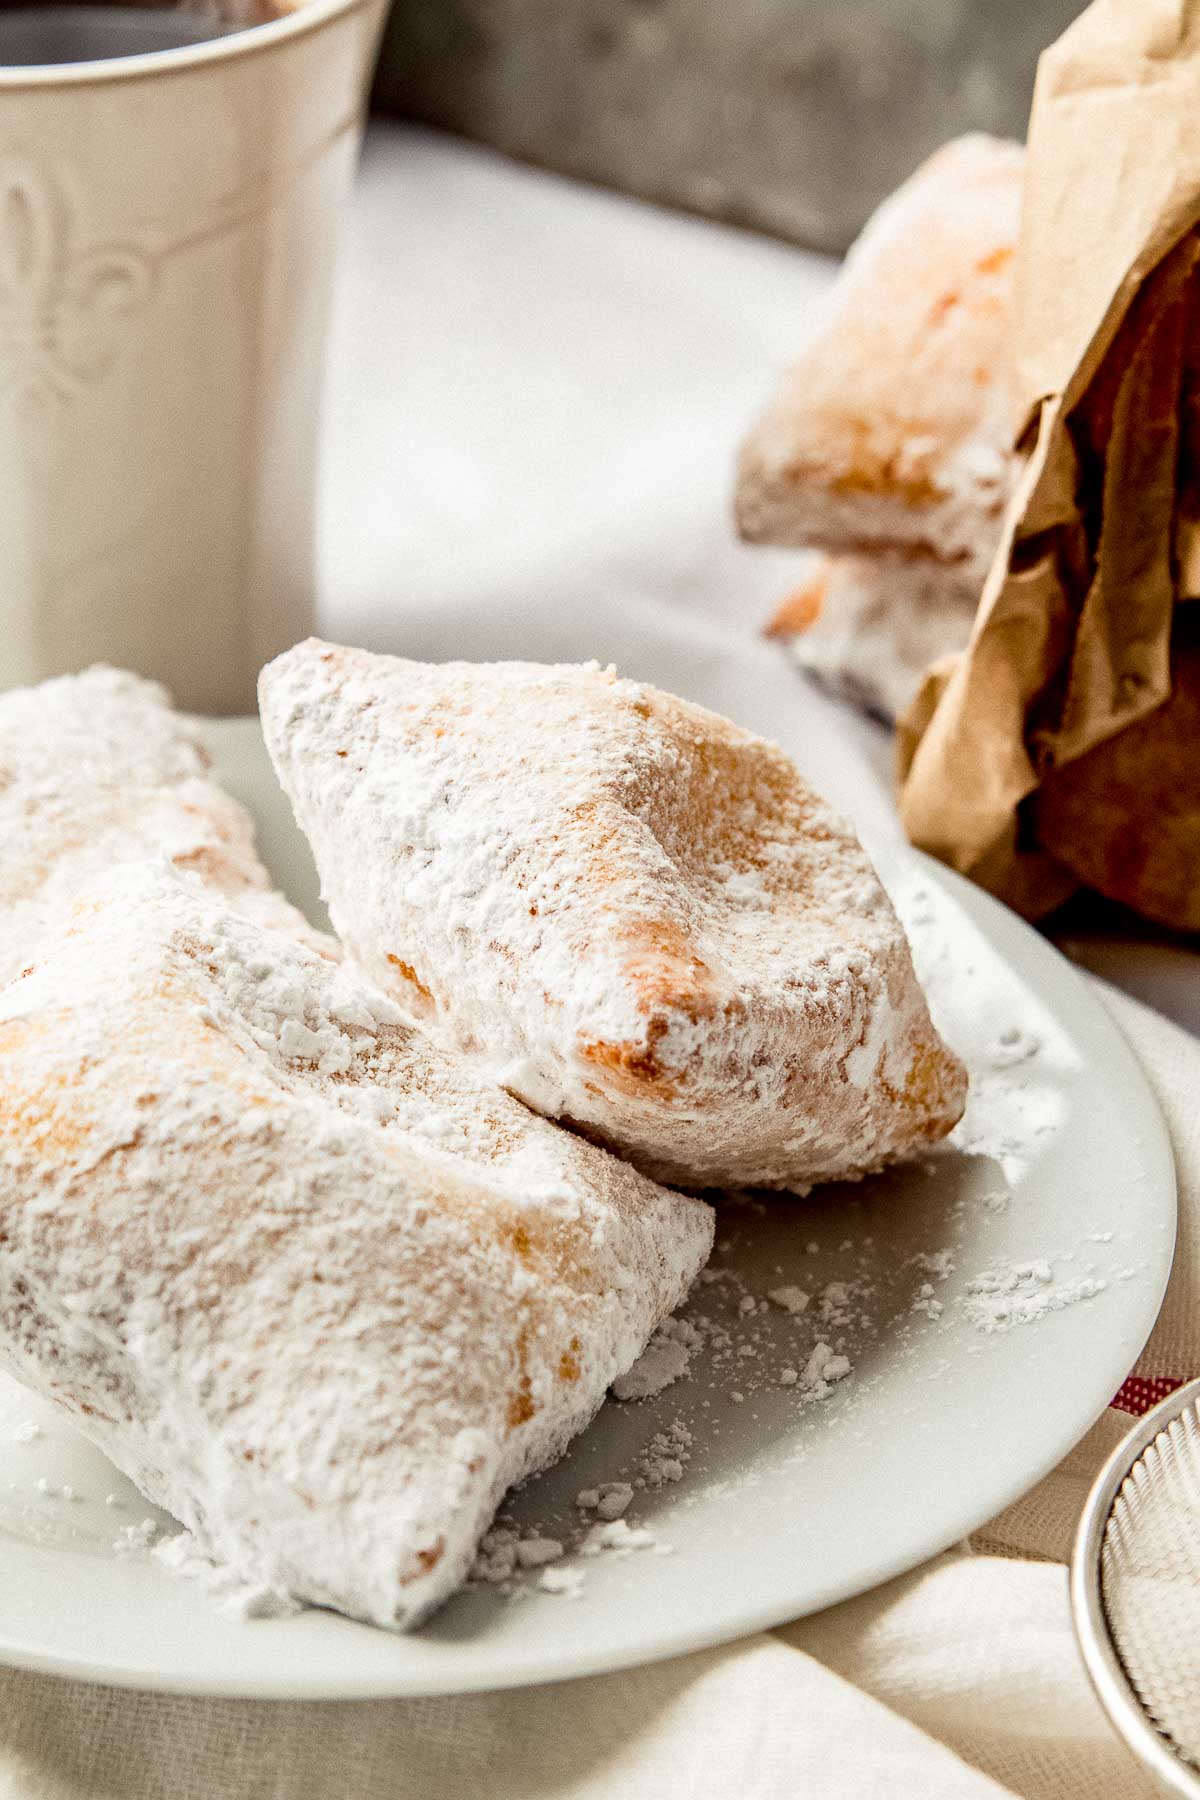 Beignets on a plate with a cup of coffee on the side.